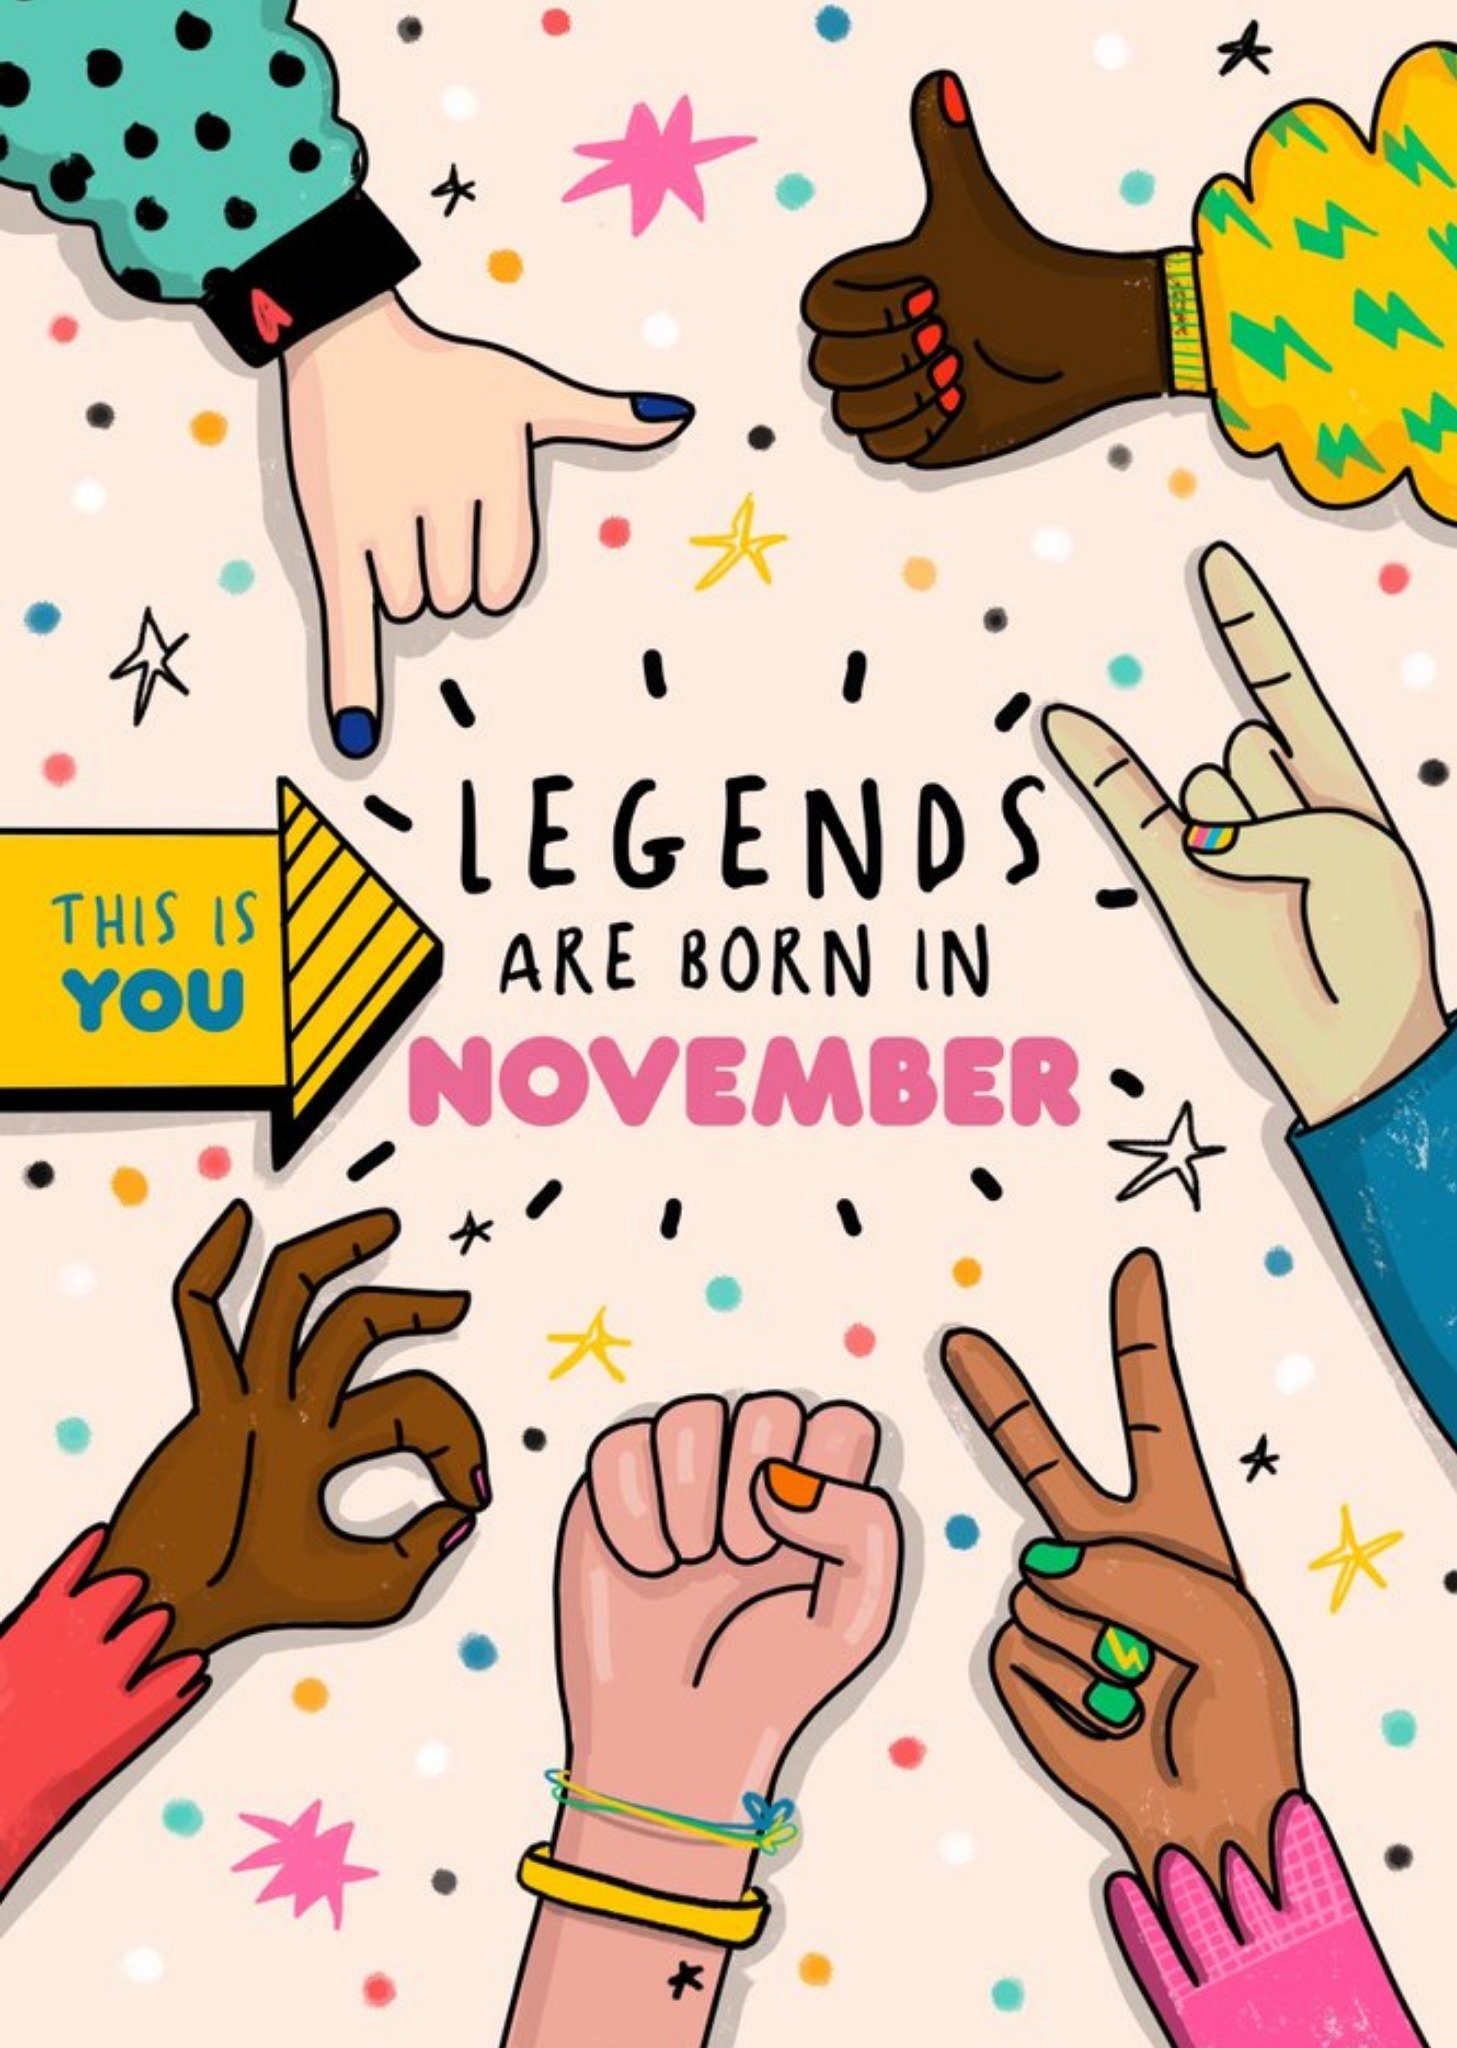 The London Studio Retro Themed Illustrations Of Various Hand Gestures Legends Are Born In November B